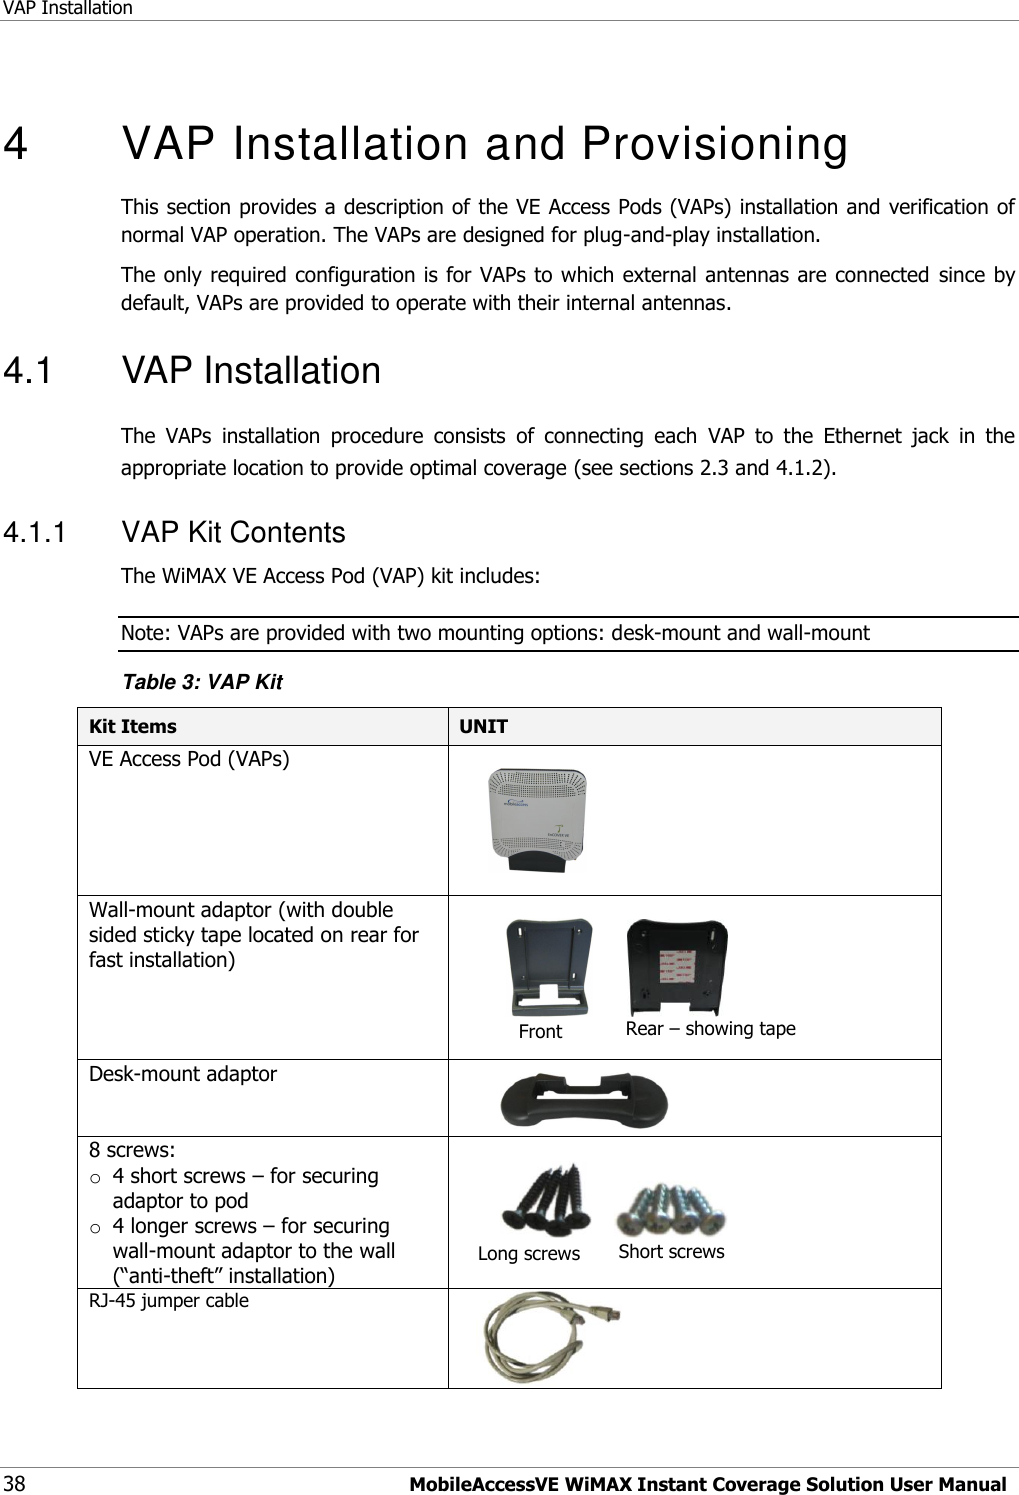 VAP Installation 38 MobileAccessVE WiMAX Instant Coverage Solution User Manual  4  VAP Installation and Provisioning This section provides a description of the VE Access Pods (VAPs) installation and verification of normal VAP operation. The VAPs are designed for plug-and-play installation. The only required configuration is for VAPs to which external antennas are connected since by default, VAPs are provided to operate with their internal antennas.  4.1  VAP Installation The  VAPs  installation  procedure  consists  of  connecting  each  VAP  to  the  Ethernet  jack  in  the appropriate location to provide optimal coverage (see sections 2.3 and 4.1.2). 4.1.1  VAP Kit Contents The WiMAX VE Access Pod (VAP) kit includes:  Note: VAPs are provided with two mounting options: desk-mount and wall-mount  Table 3: VAP Kit Kit Items UNIT  VE Access Pod (VAPs)                                           Wall-mount adaptor (with double sided sticky tape located on rear for fast installation)                                  Desk-mount adaptor          8 screws: o 4 short screws – for securing adaptor to pod o 4 longer screws – for securing wall-mount adaptor to the wall (“anti-theft” installation)                   RJ-45 jumper cable      Front Rear – showing tape  Long screws Short screws 